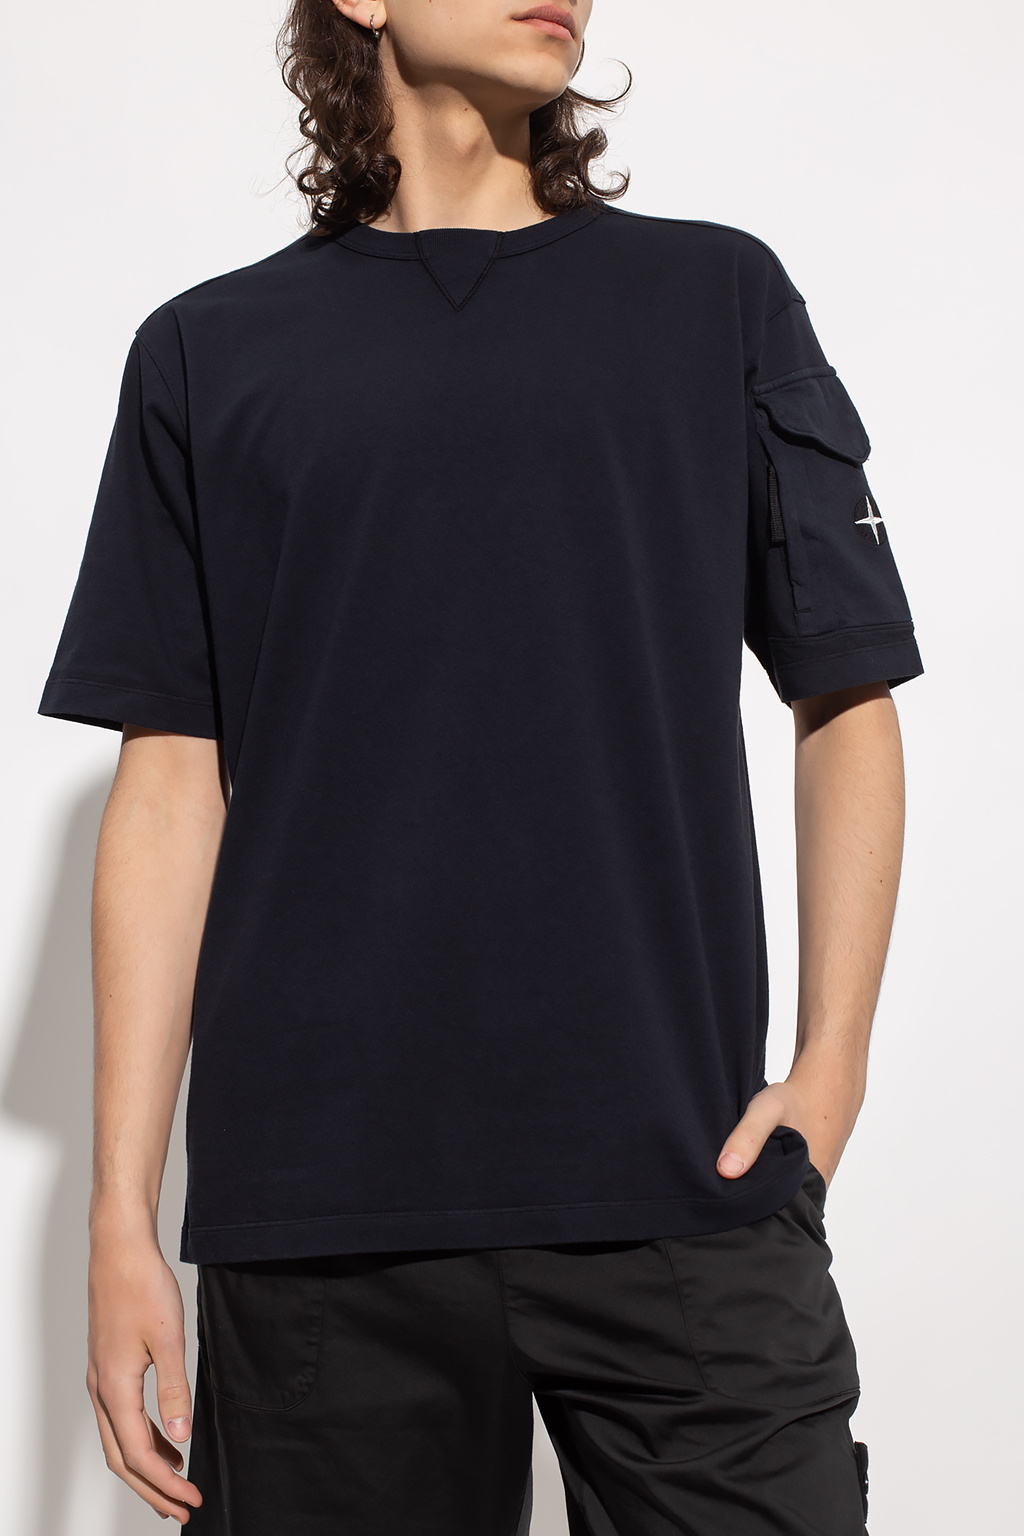 Stone Island T-shirt Tailored with pockets